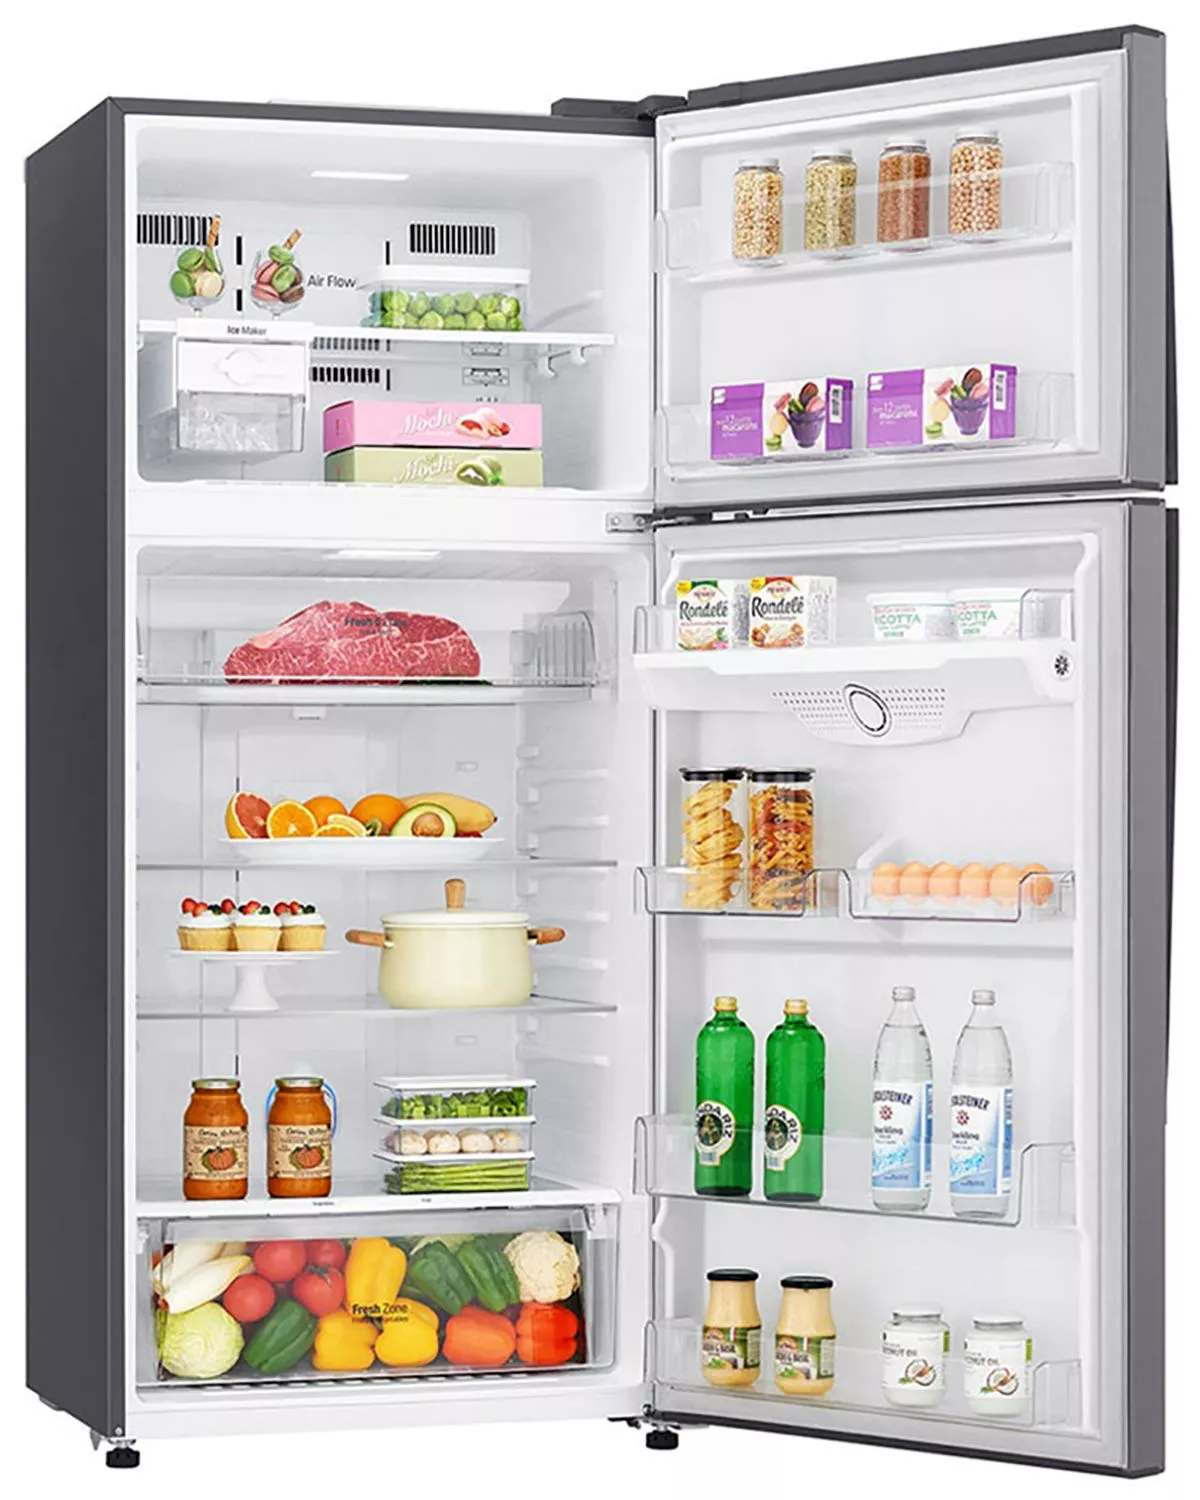 Best LG Refrigerator 516 L Frost Free Double Door 3-Star - Fronts by take-product.com